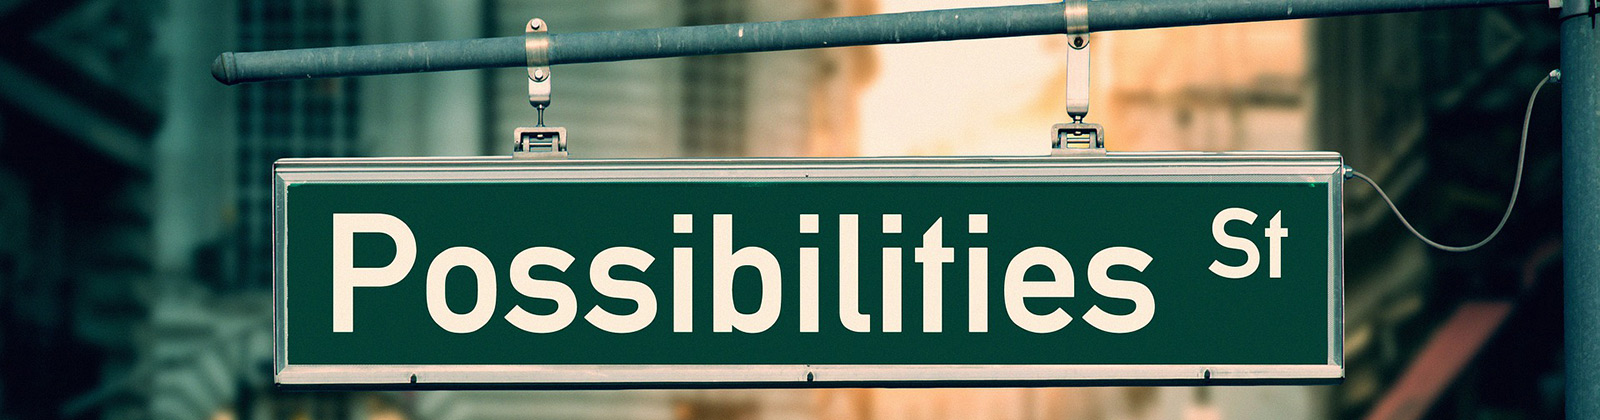 possibilities st sign, Image by Gerd Altmann from Pixabay